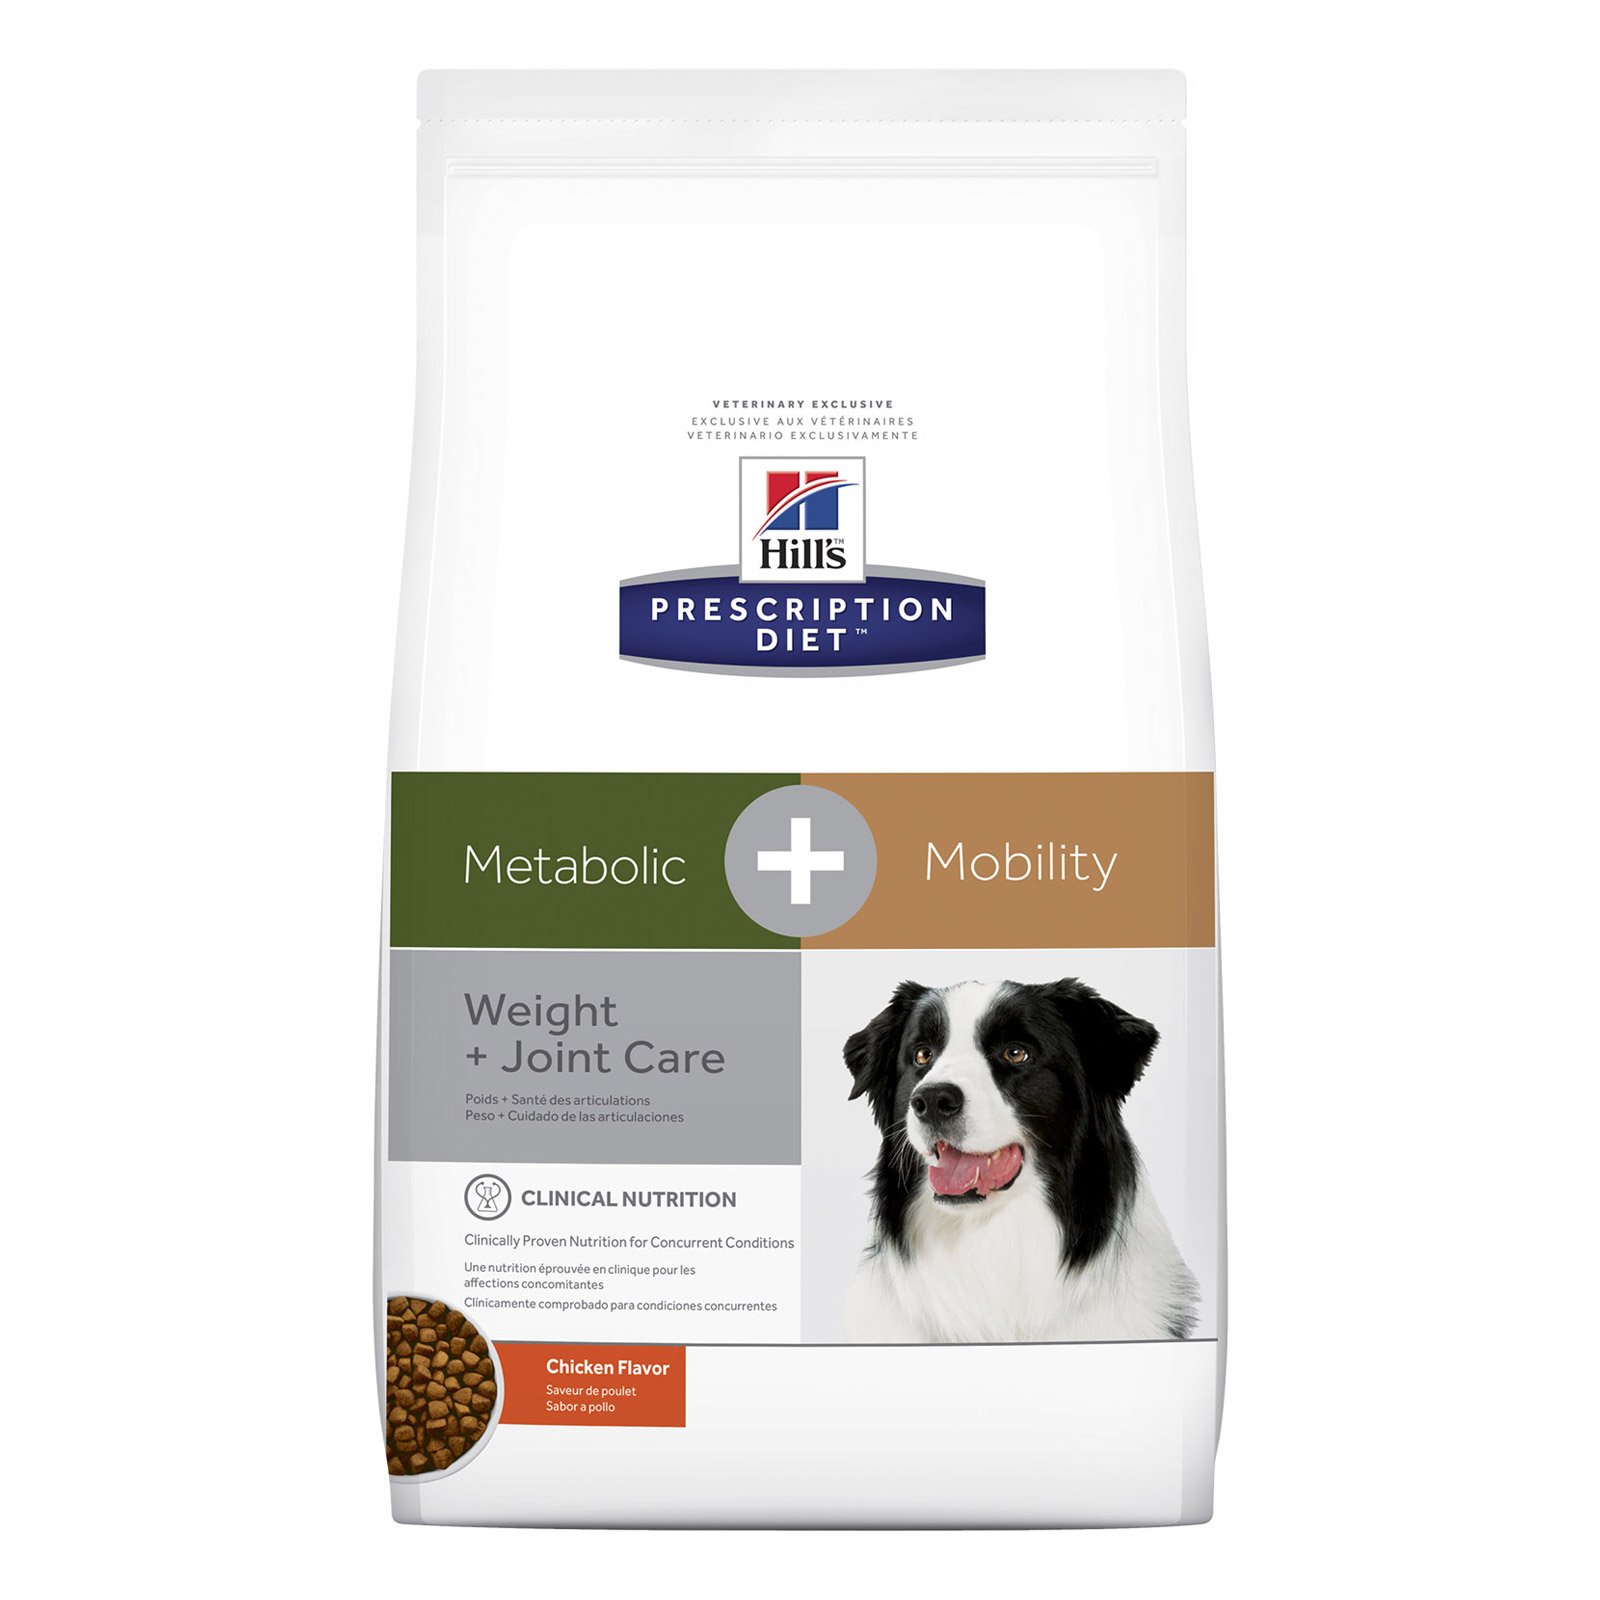 Hill’s Prescription Diet Metabolic + Mobility (Weight and Joint Care) Dry Dog Food